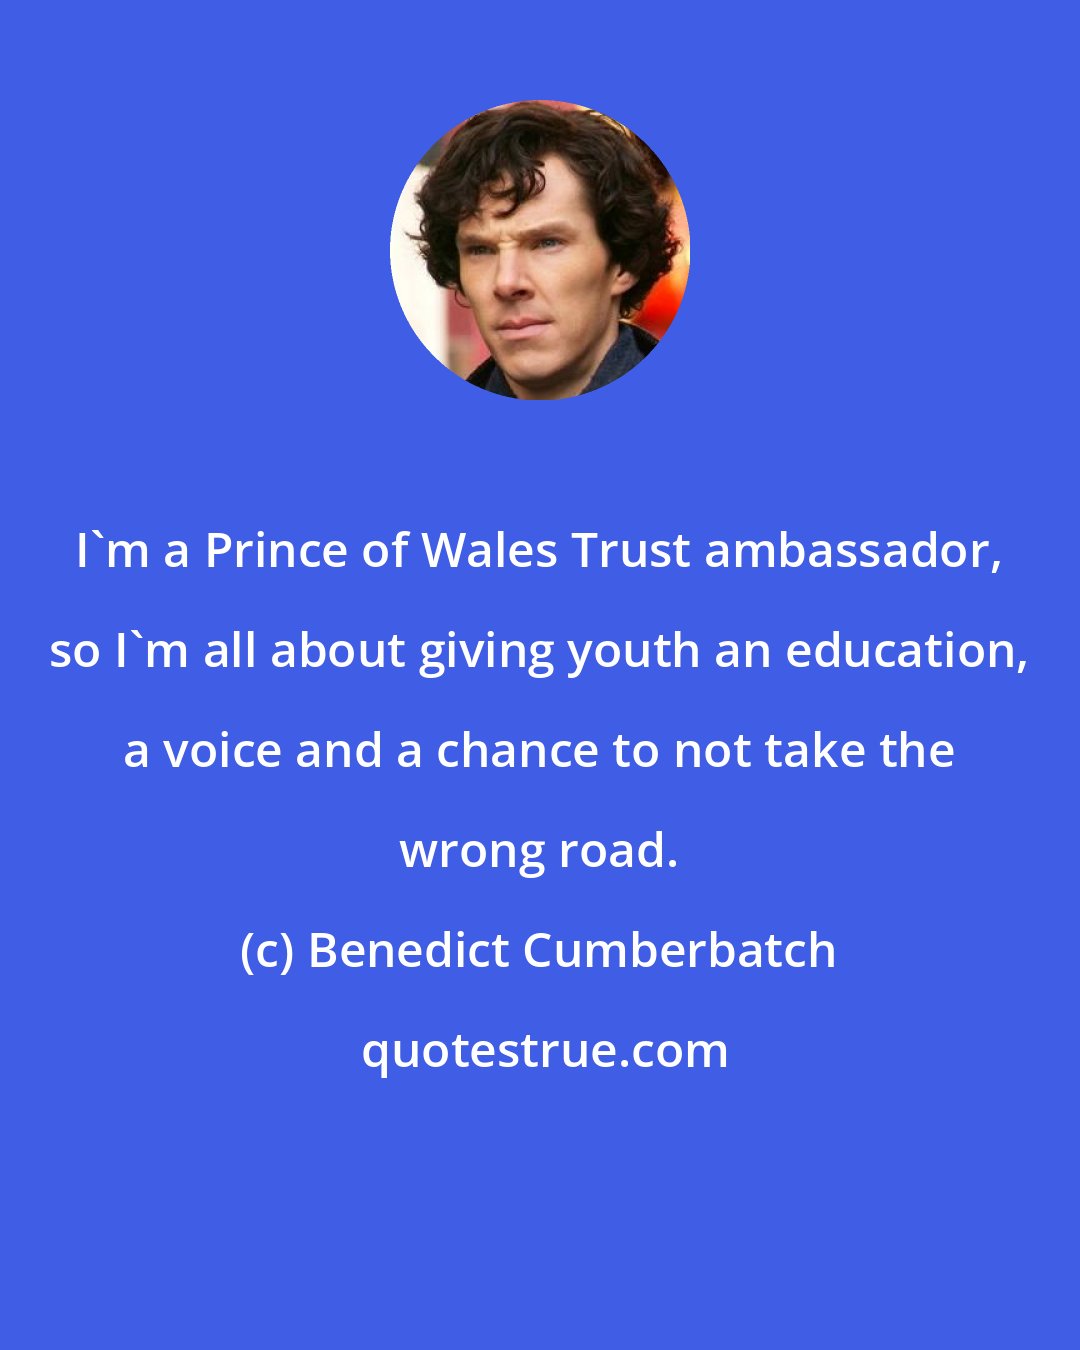 Benedict Cumberbatch: I'm a Prince of Wales Trust ambassador, so I'm all about giving youth an education, a voice and a chance to not take the wrong road.